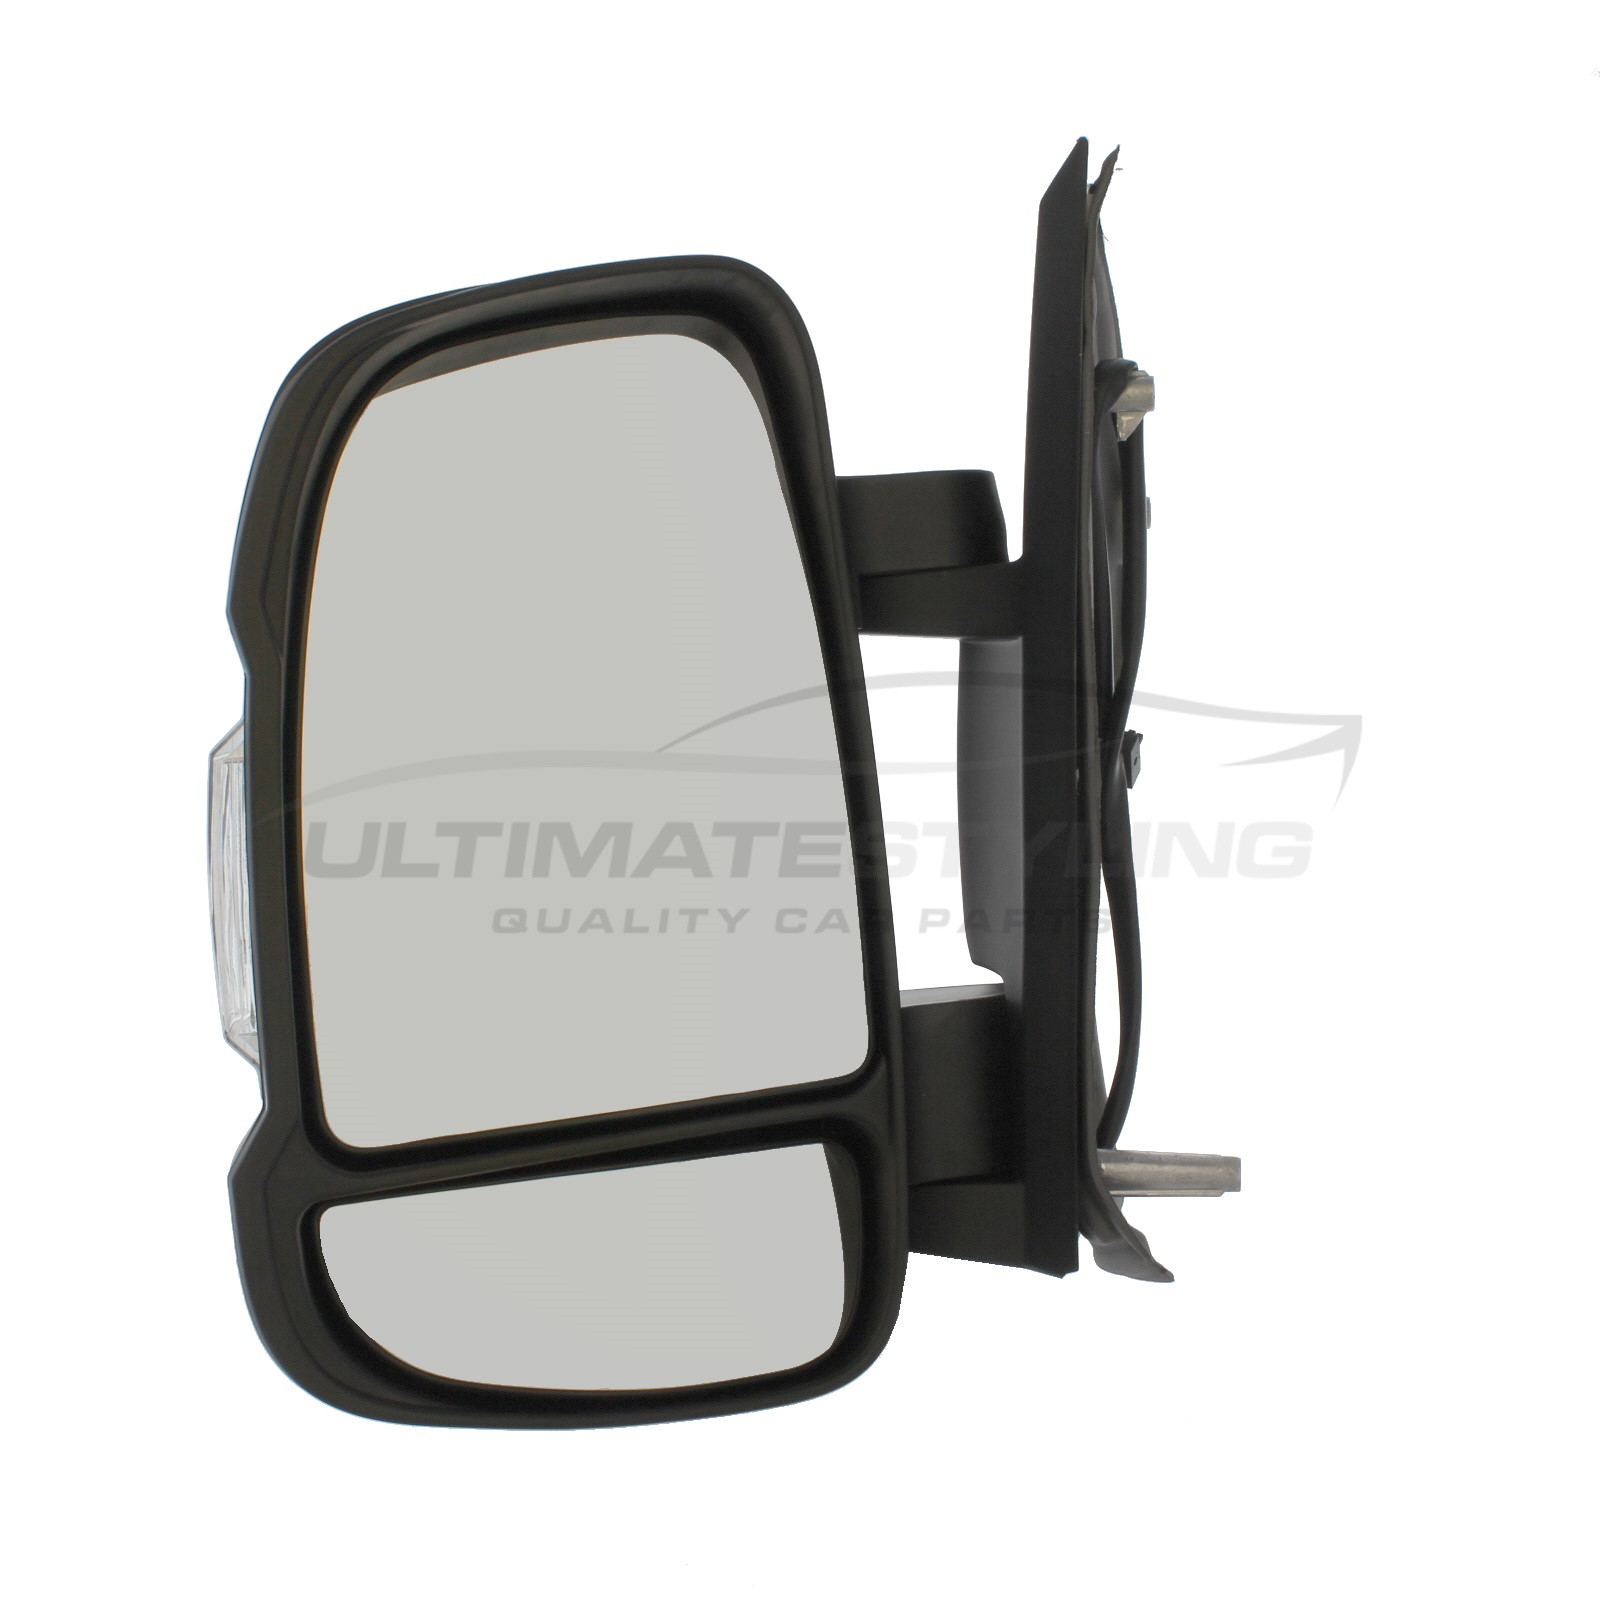 Wing Mirror / Door Mirror - Passenger Side (LH) - Electric adjustment -  Heated Glass - Indicator - Black for Citroen Relay, Fiat Ducato, Peugeot  Boxer and others